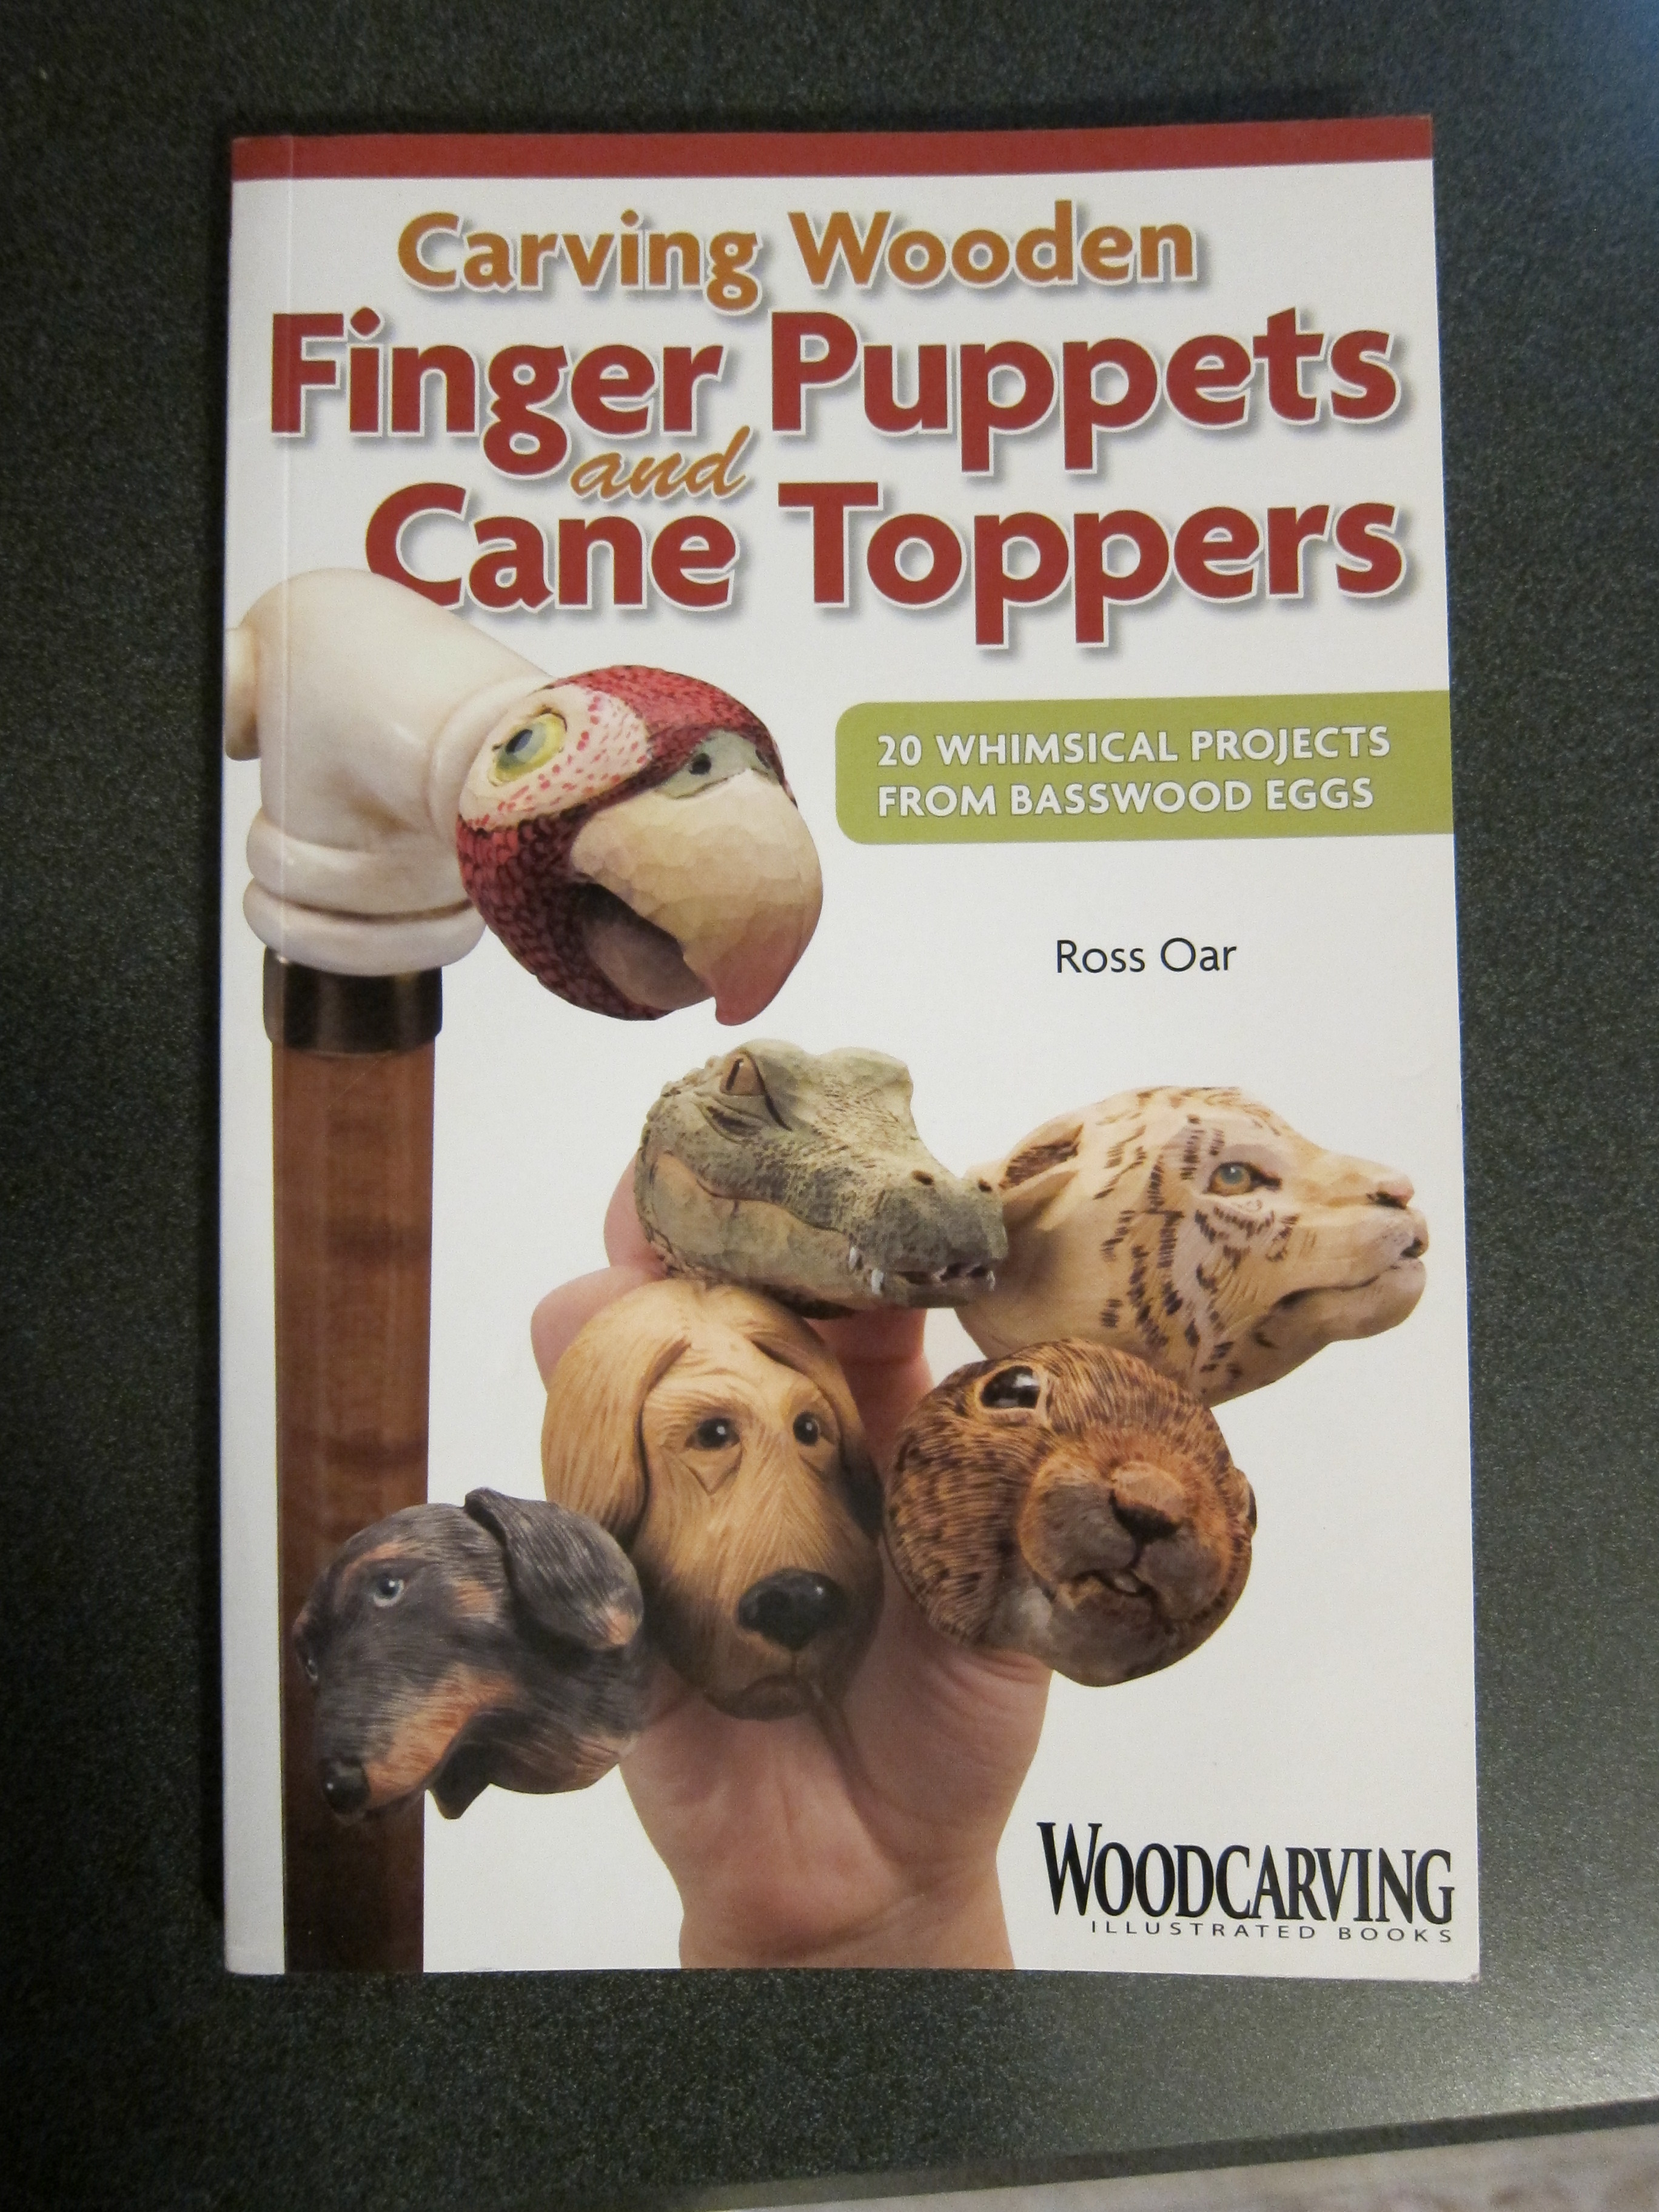 Carving Wooden Finger Puppets Cane Toppers